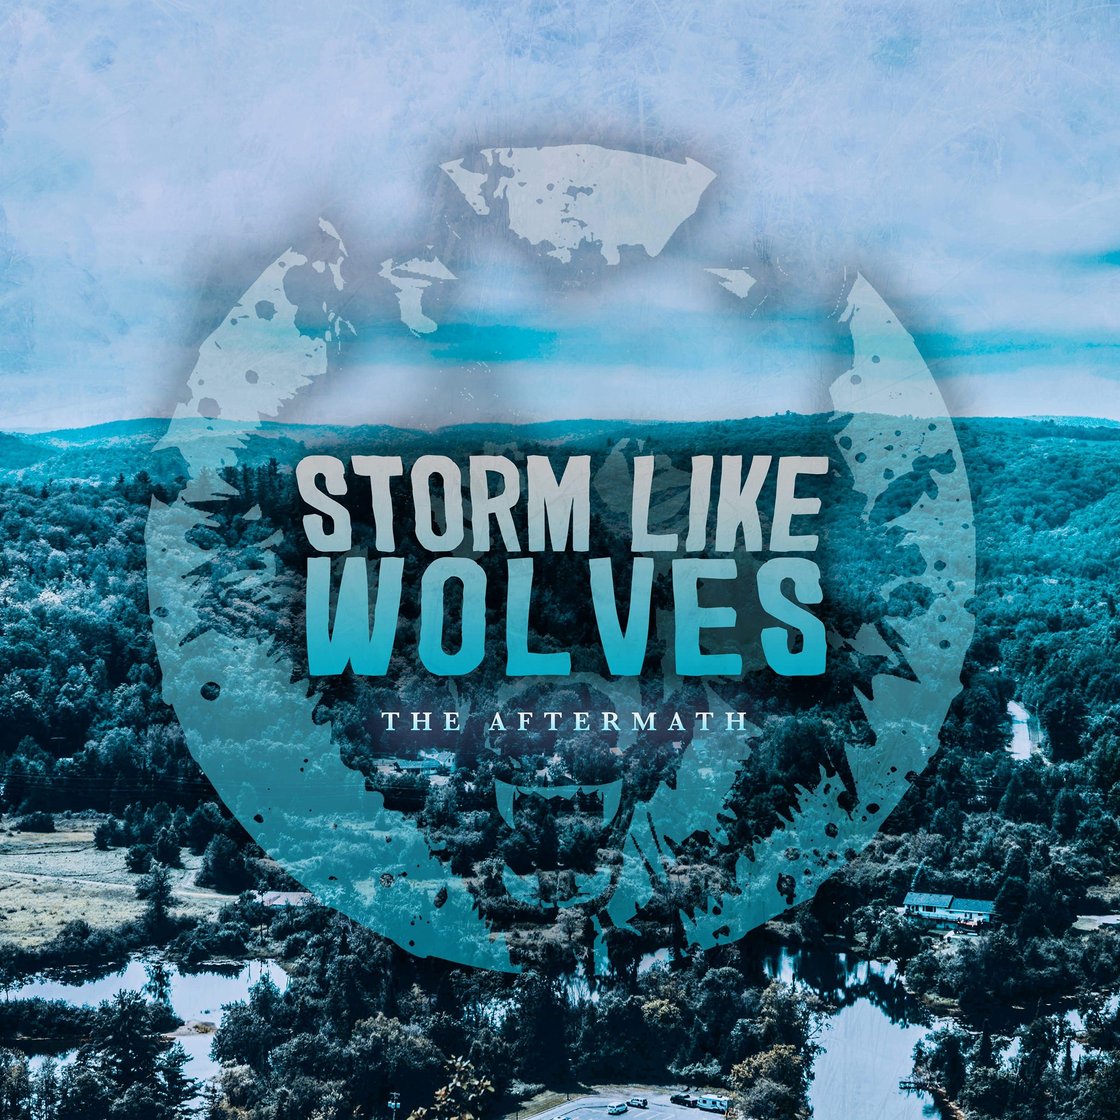 STORM LIKE WOLVES - The Aftermath cover 